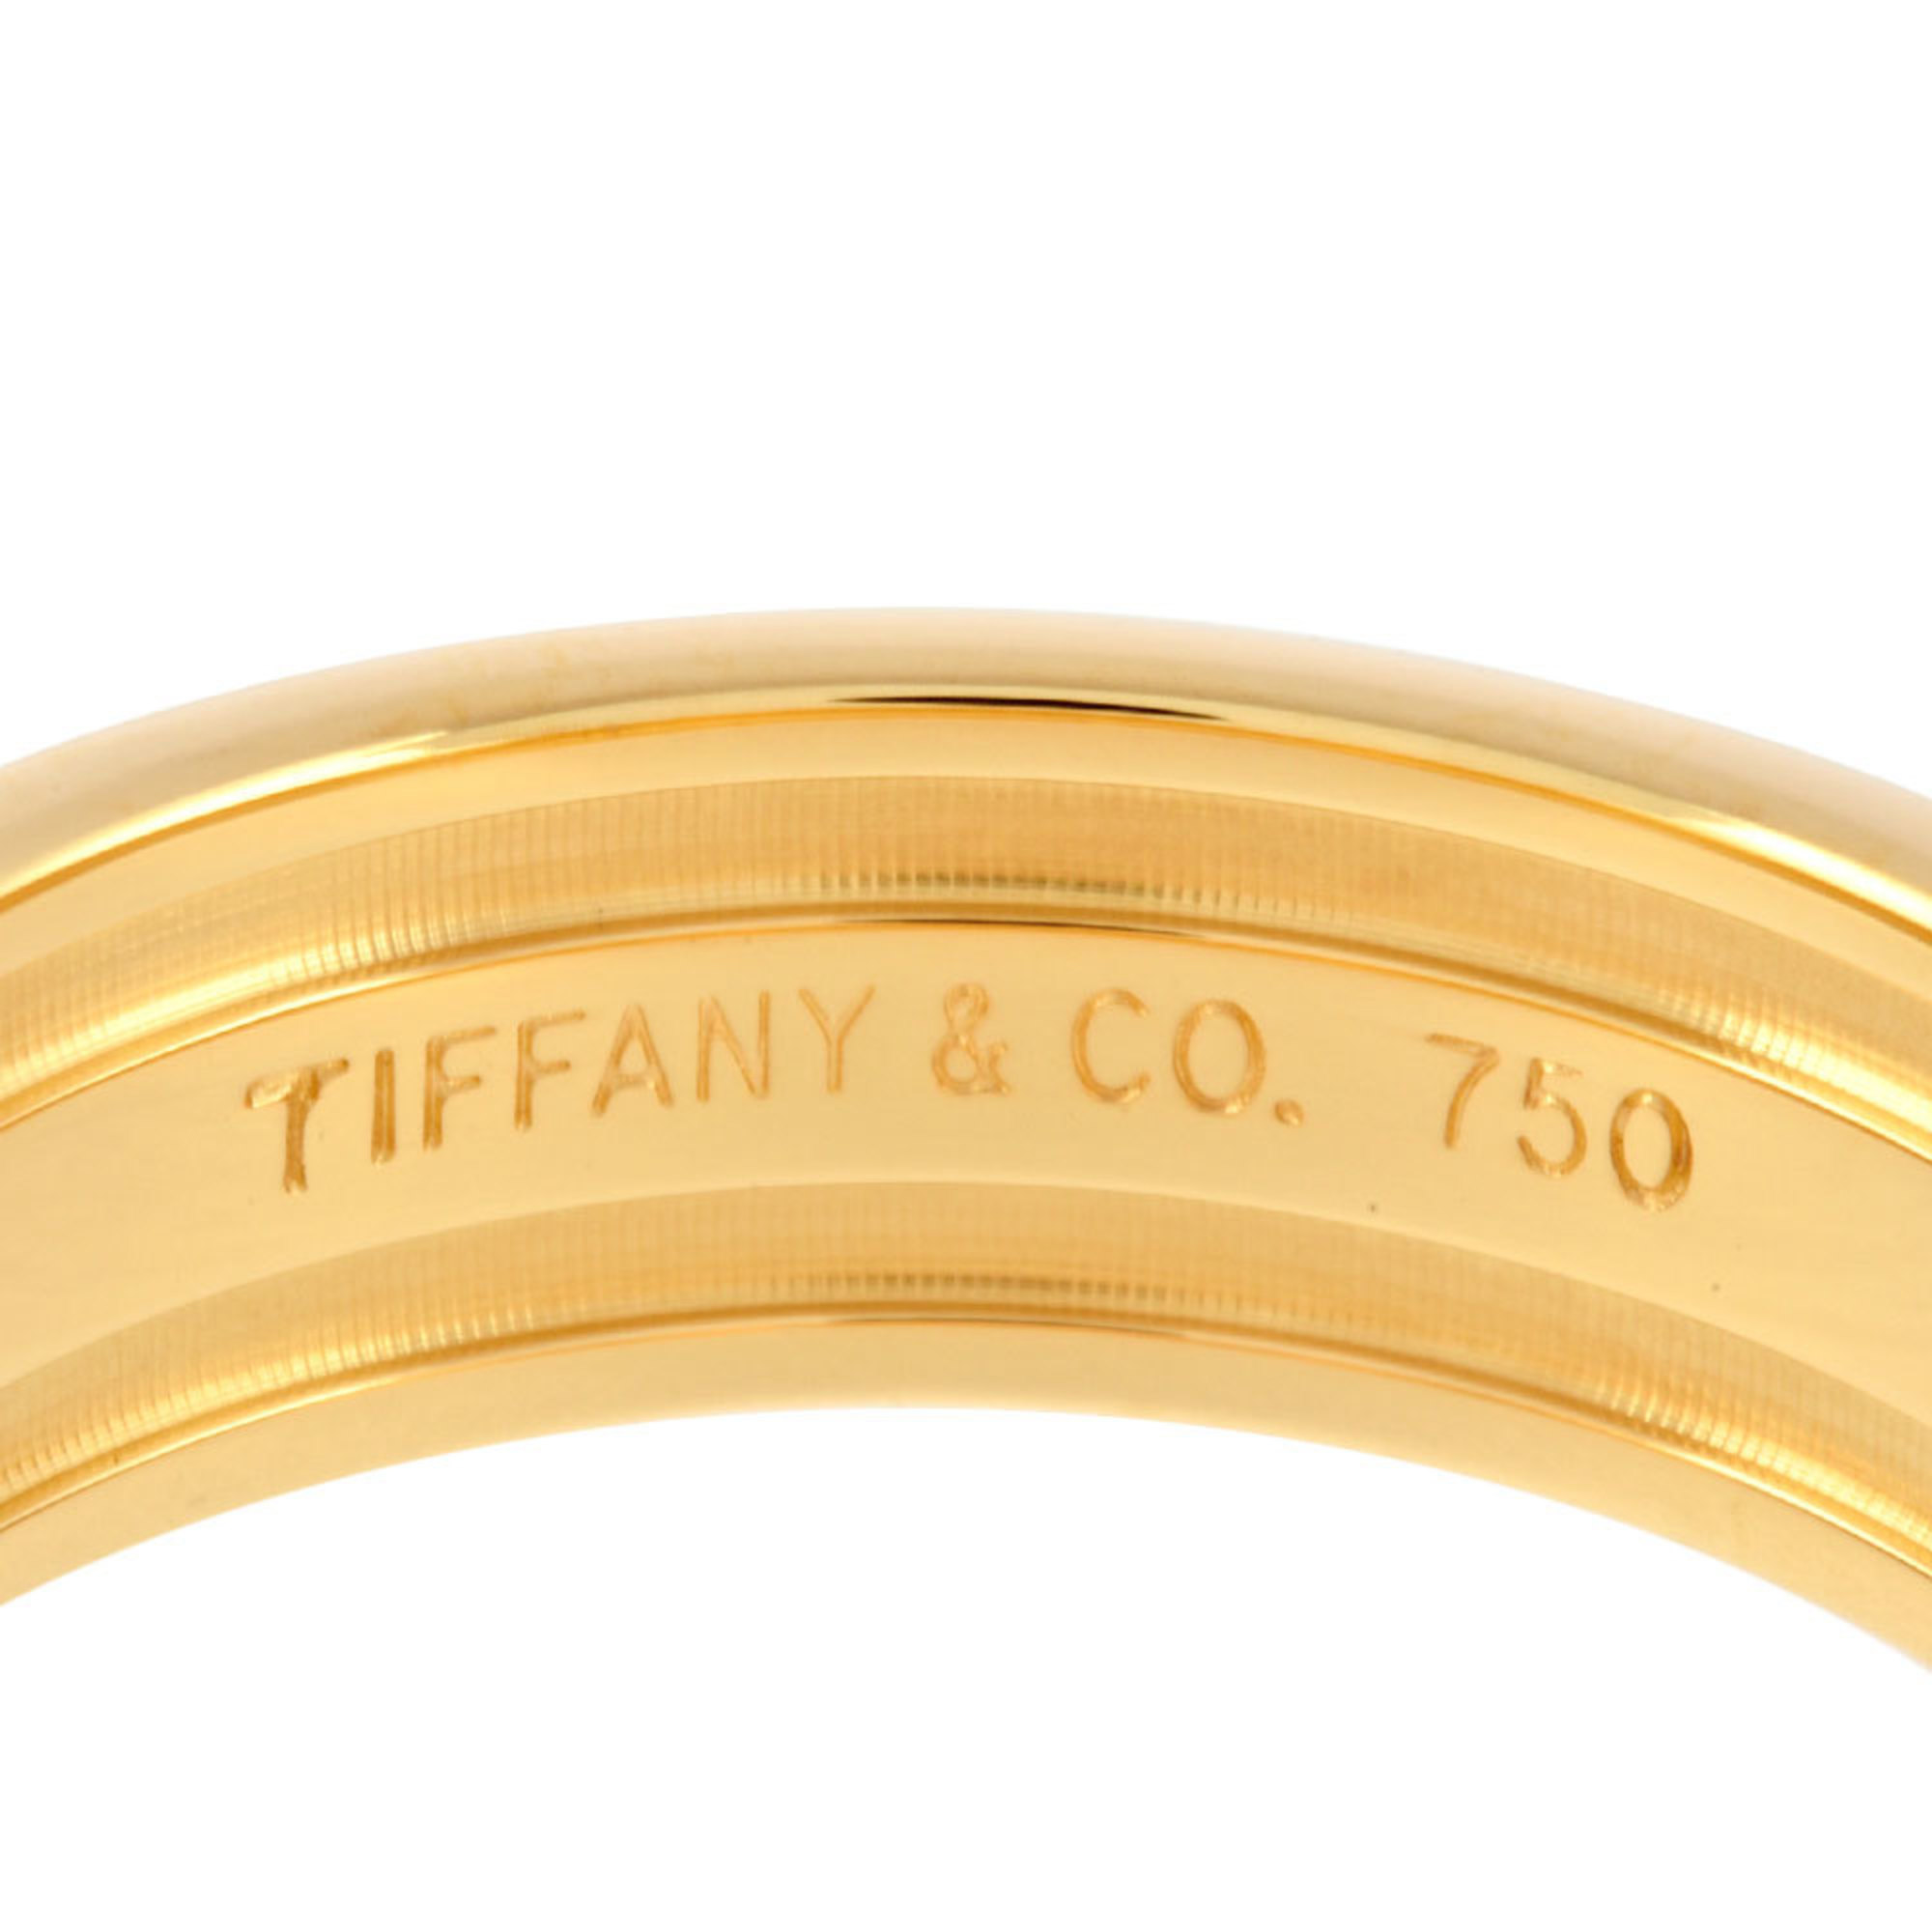 Tiffany & Co. Grooved Ring, Size 12, K18YG, Women's